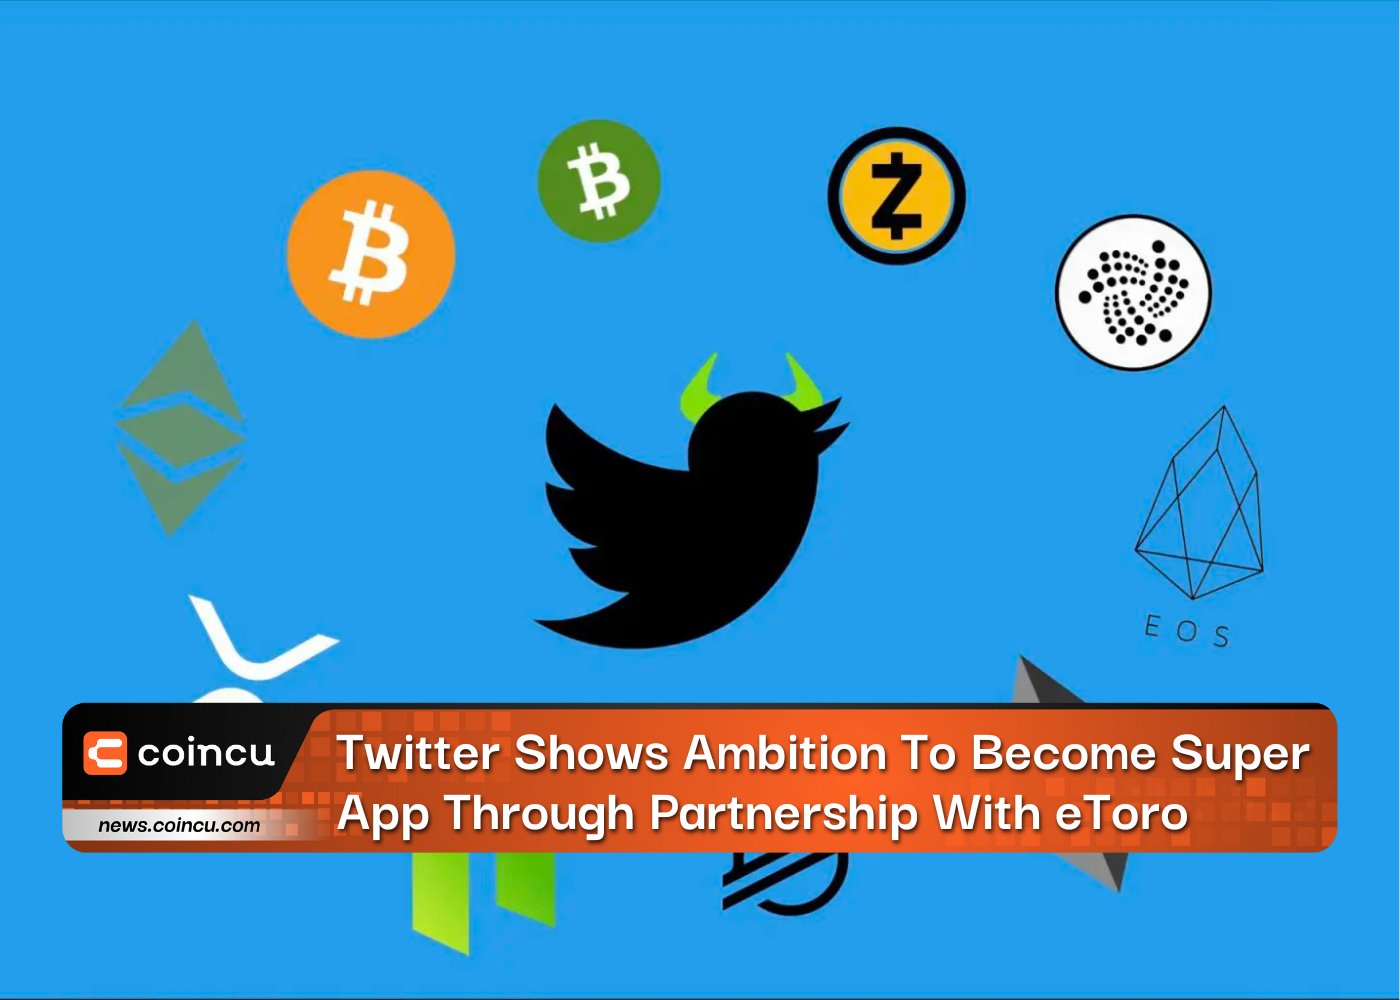 Twitter Shows Ambition To Become Super App Through Partnership With eToro